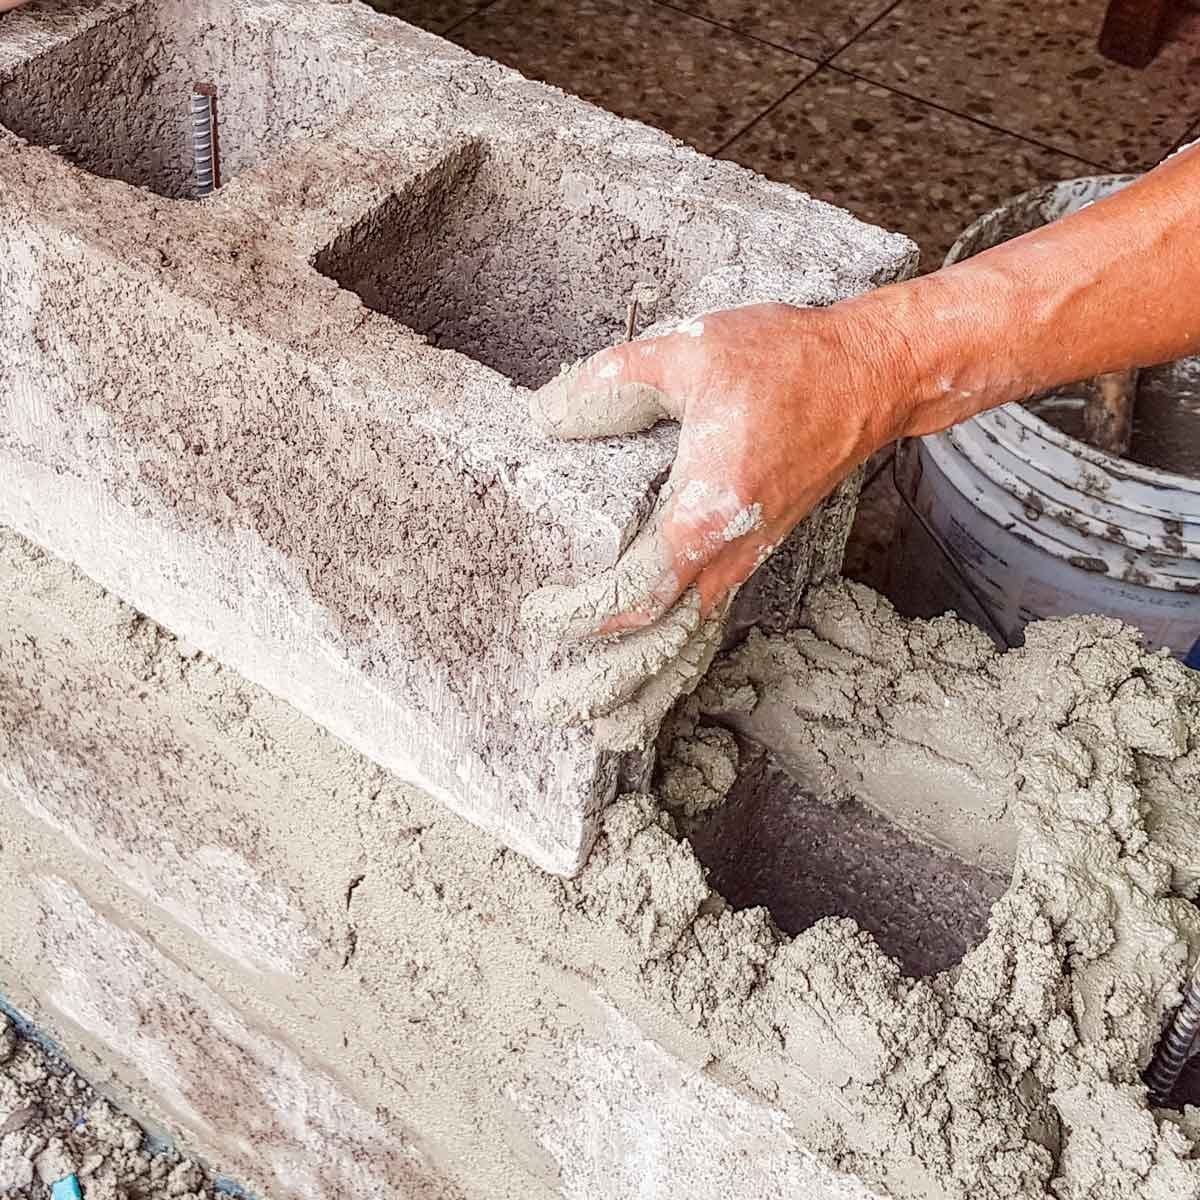 14 Tips and Tricks for Working With Concrete